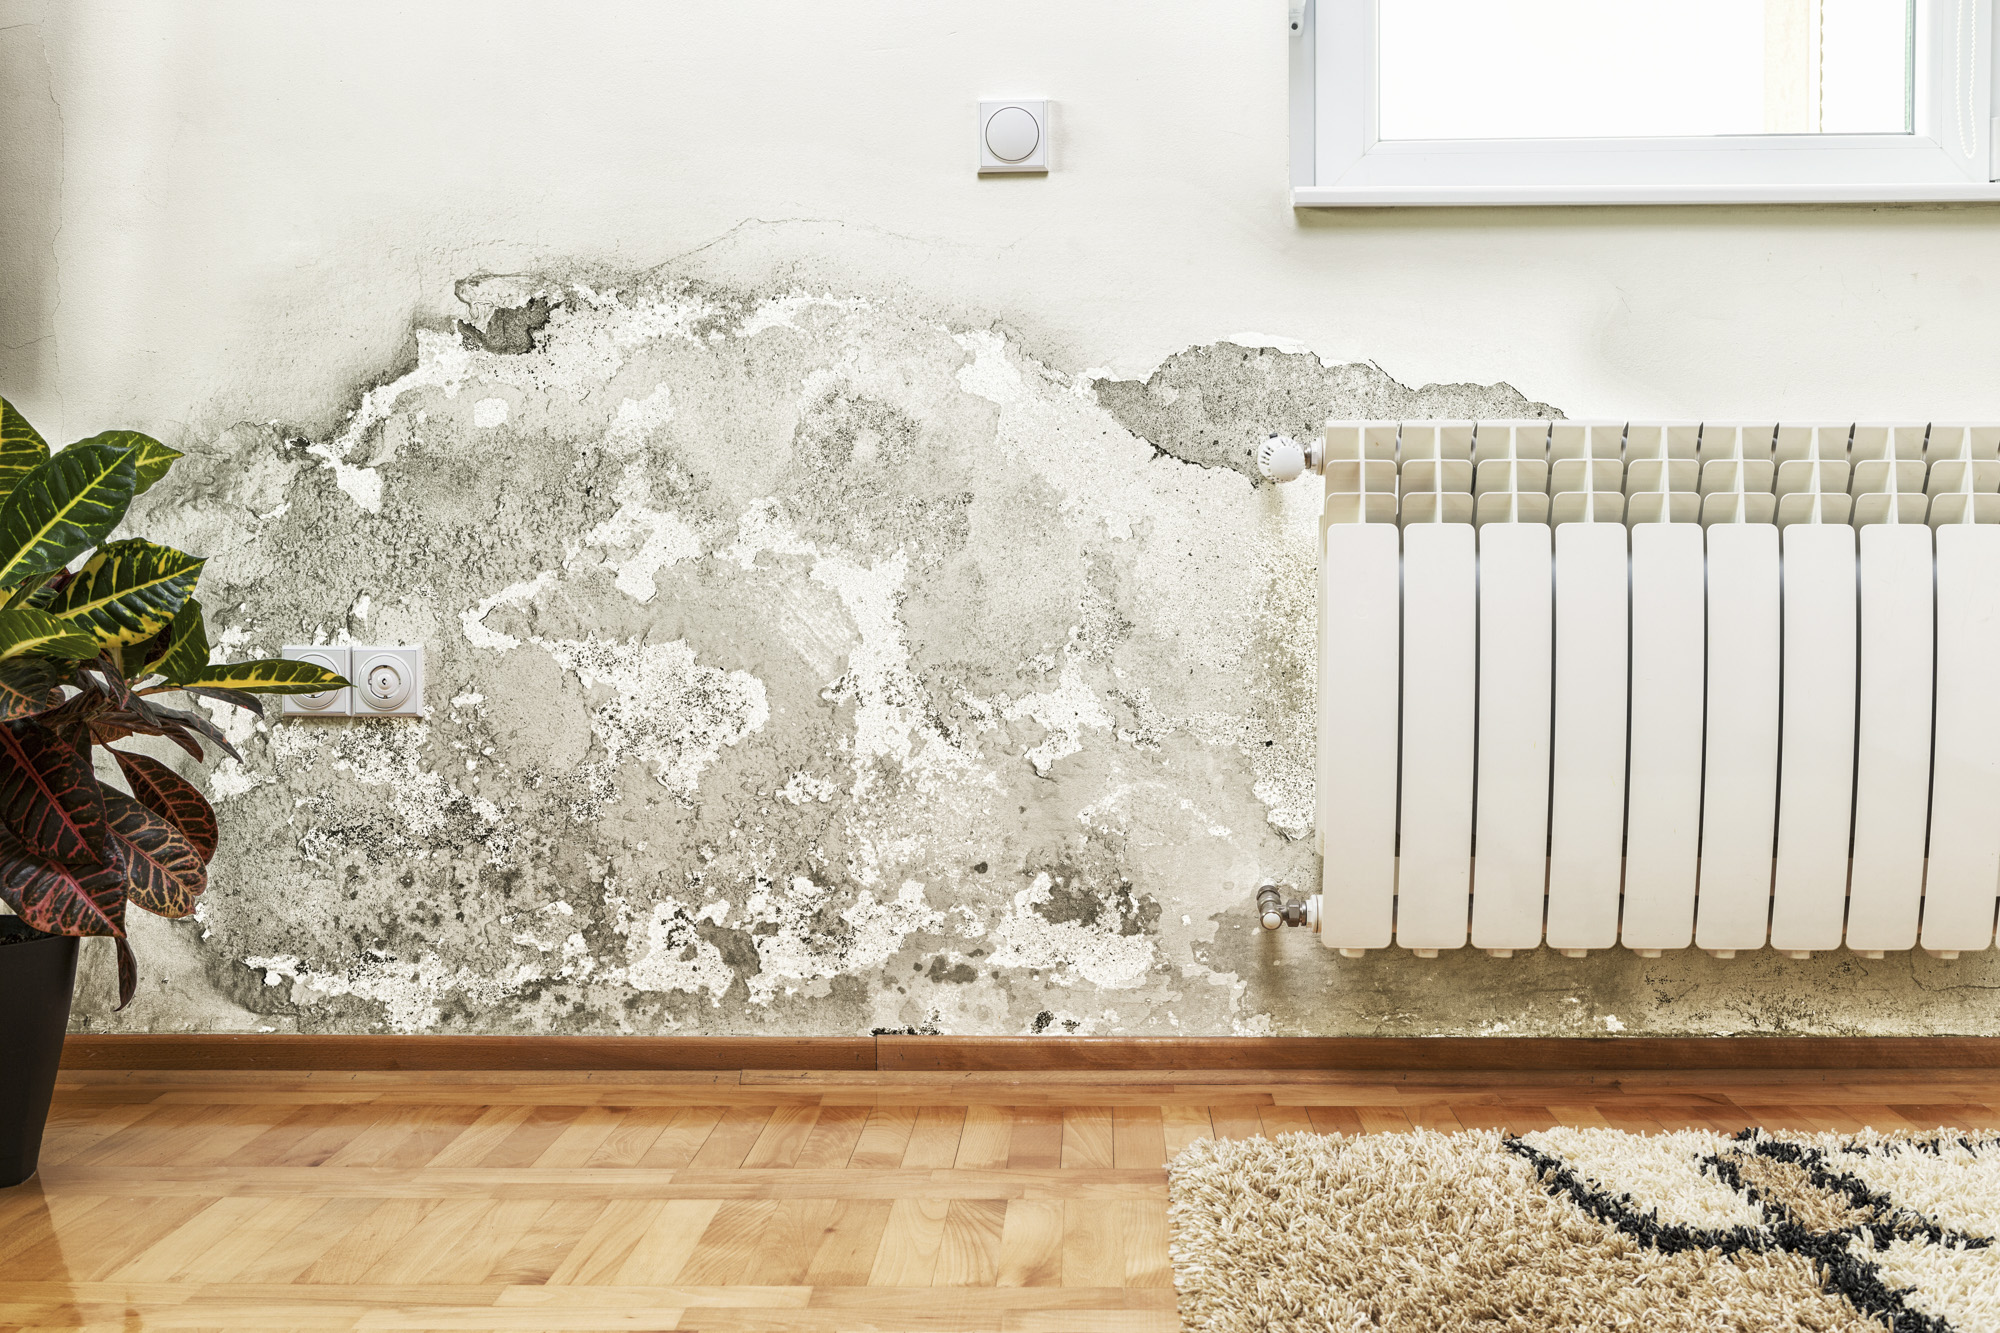 5 Common Signs You Have Mold in Your House